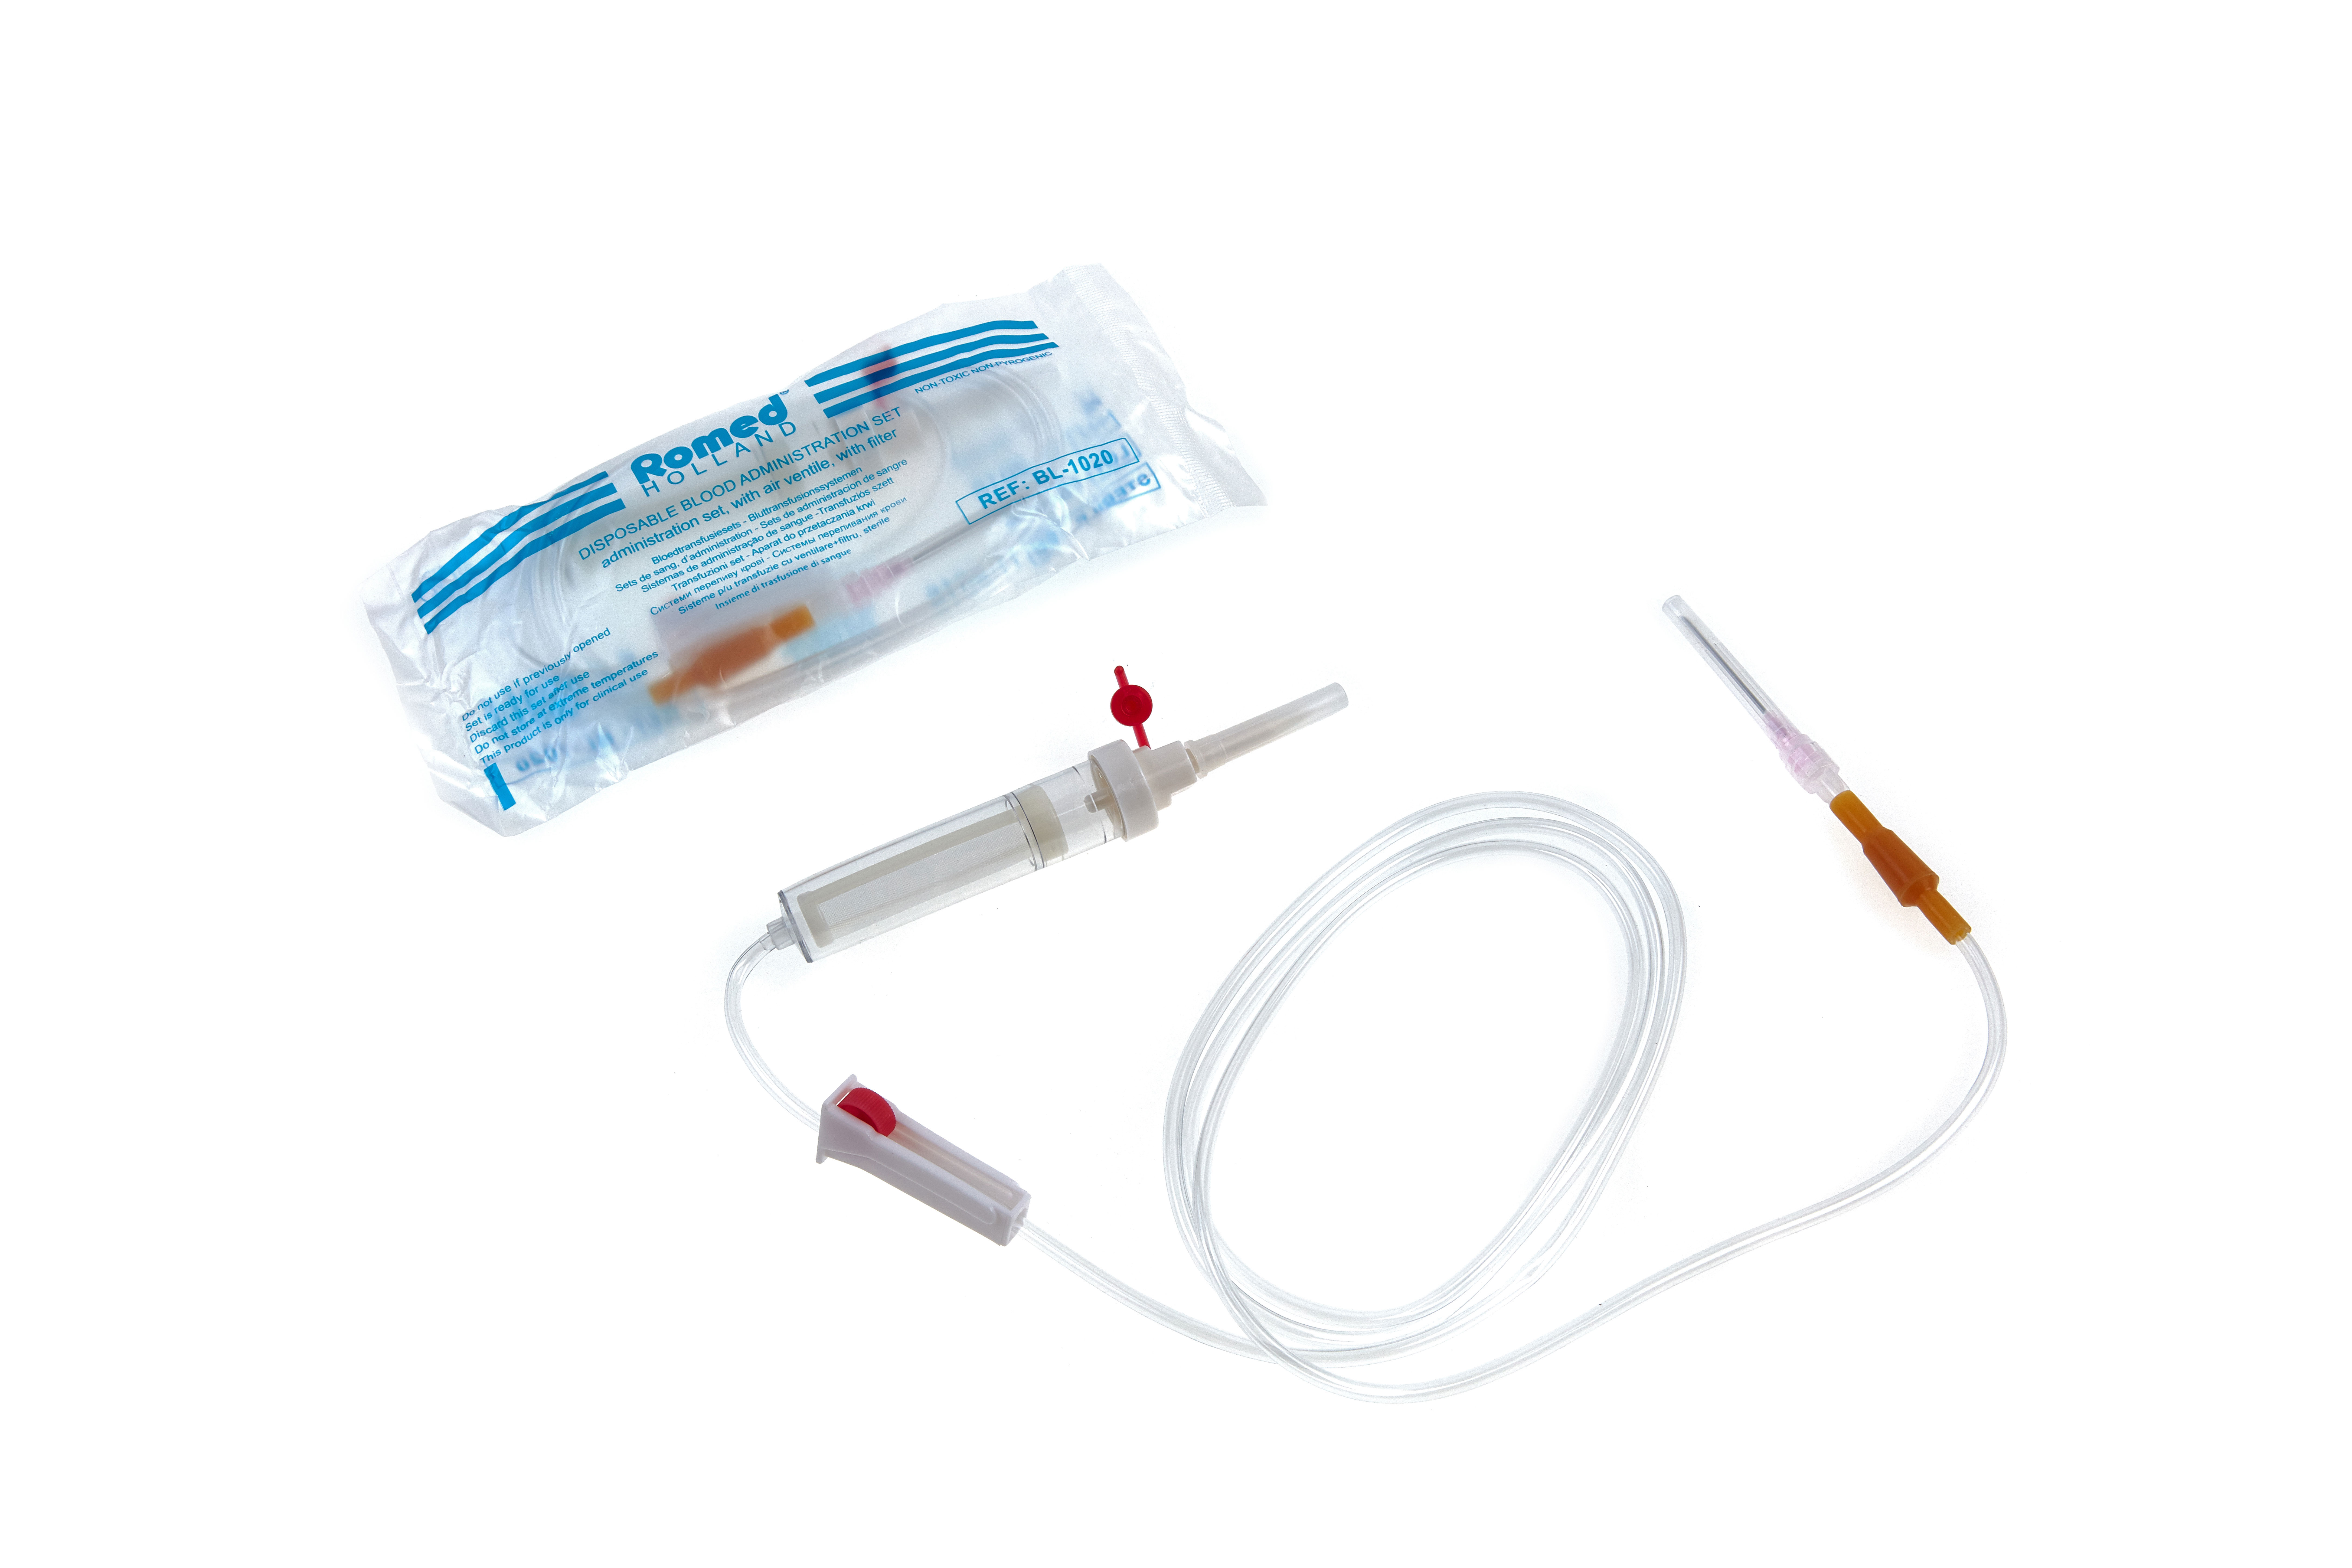 BL-1020 Romed blood administration sets with air ventile + filter, sterile per piece in a polybag, 250 pcs in a carton.